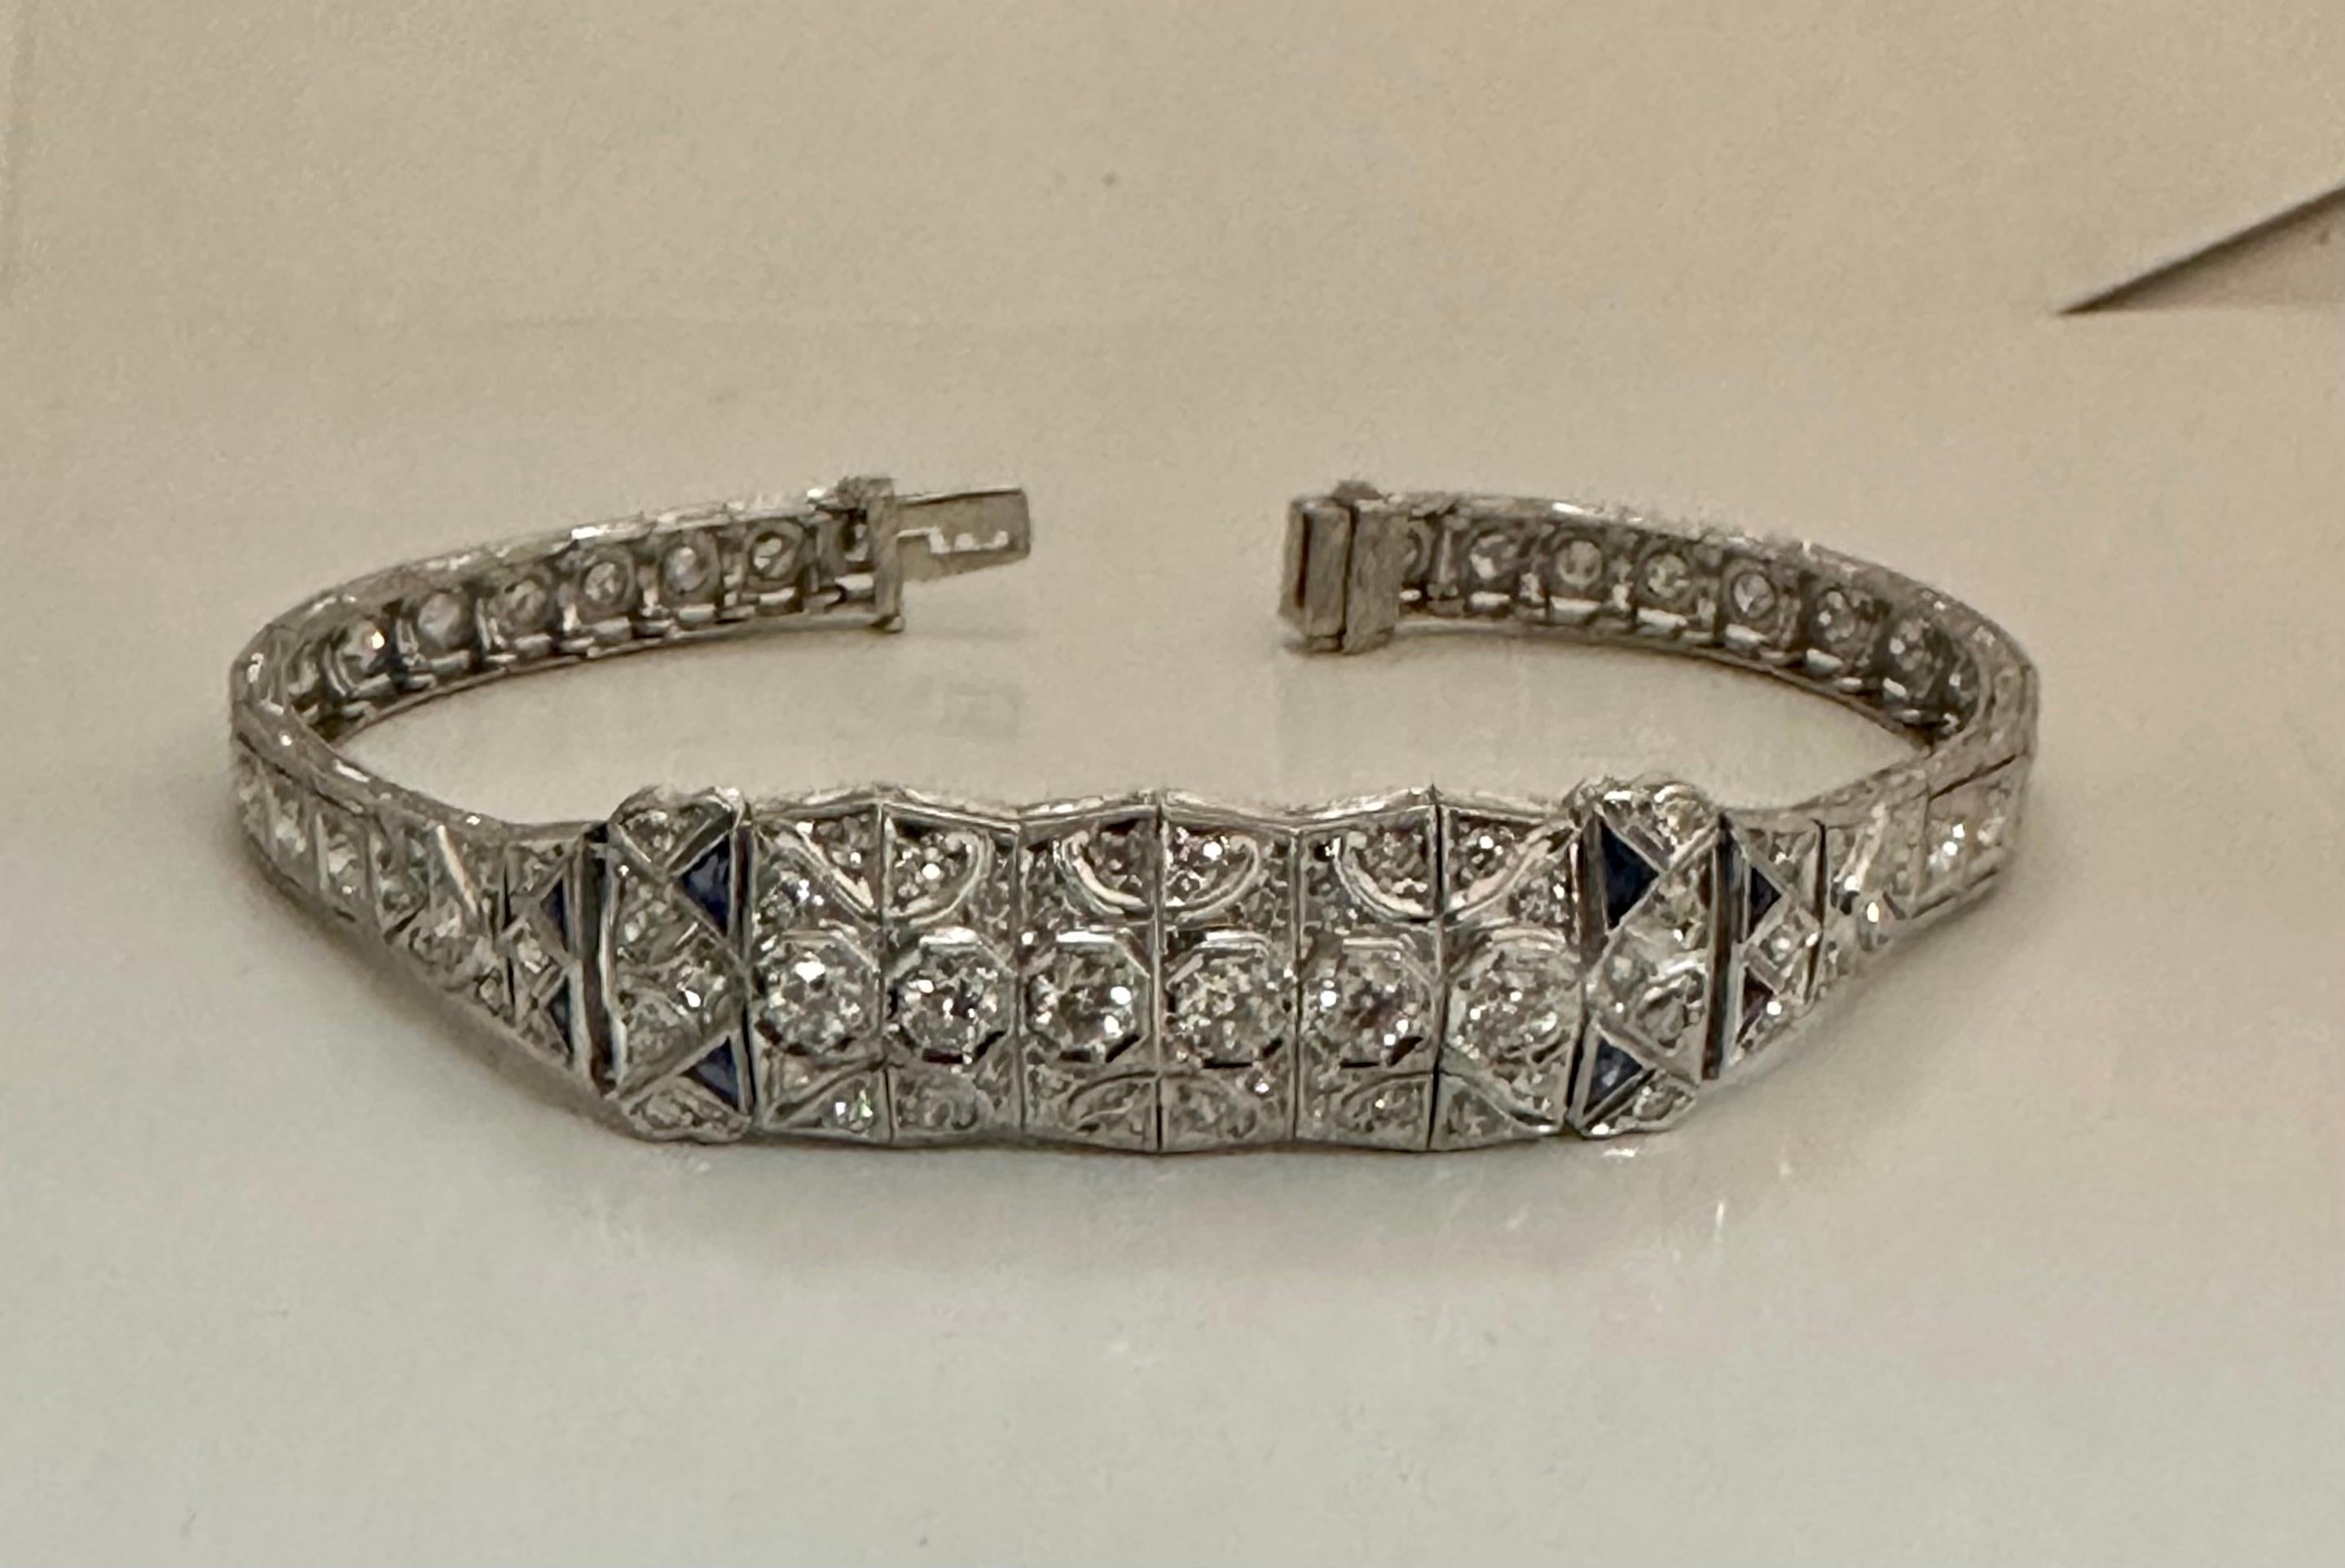 Edwardian Diamond & Sapphire Bracelet In Good Condition For Sale In Bronx, NY